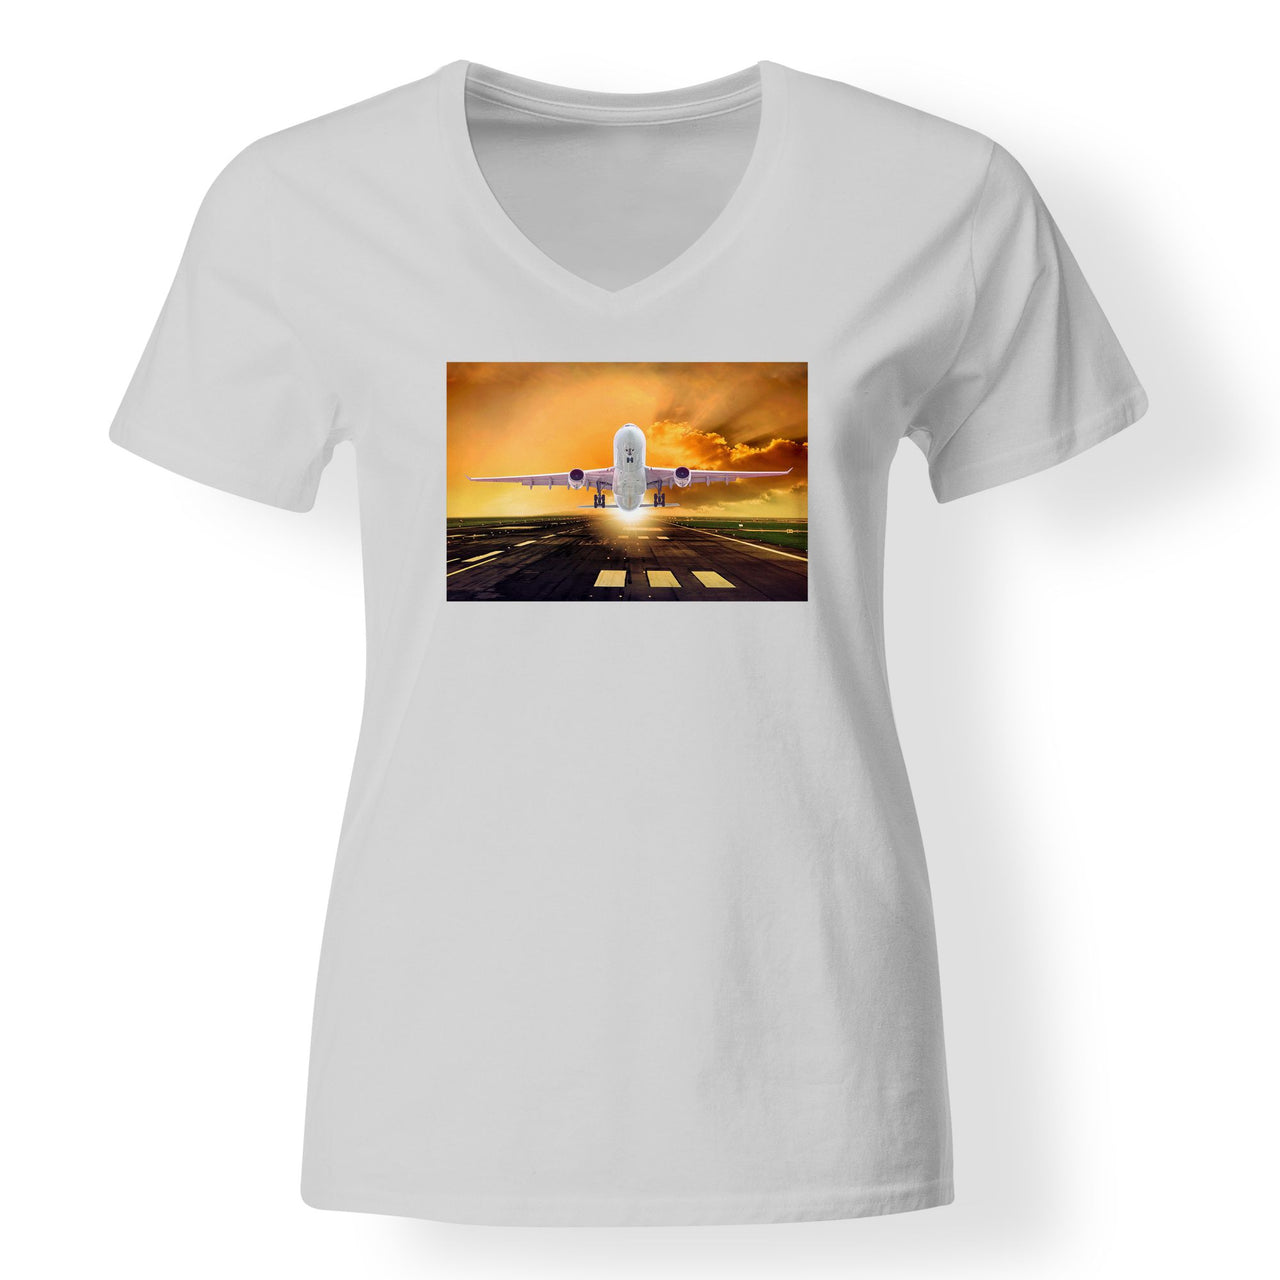 Amazing Departing Aircraft Sunset & Clouds Behind Designed V-Neck T-Shirts